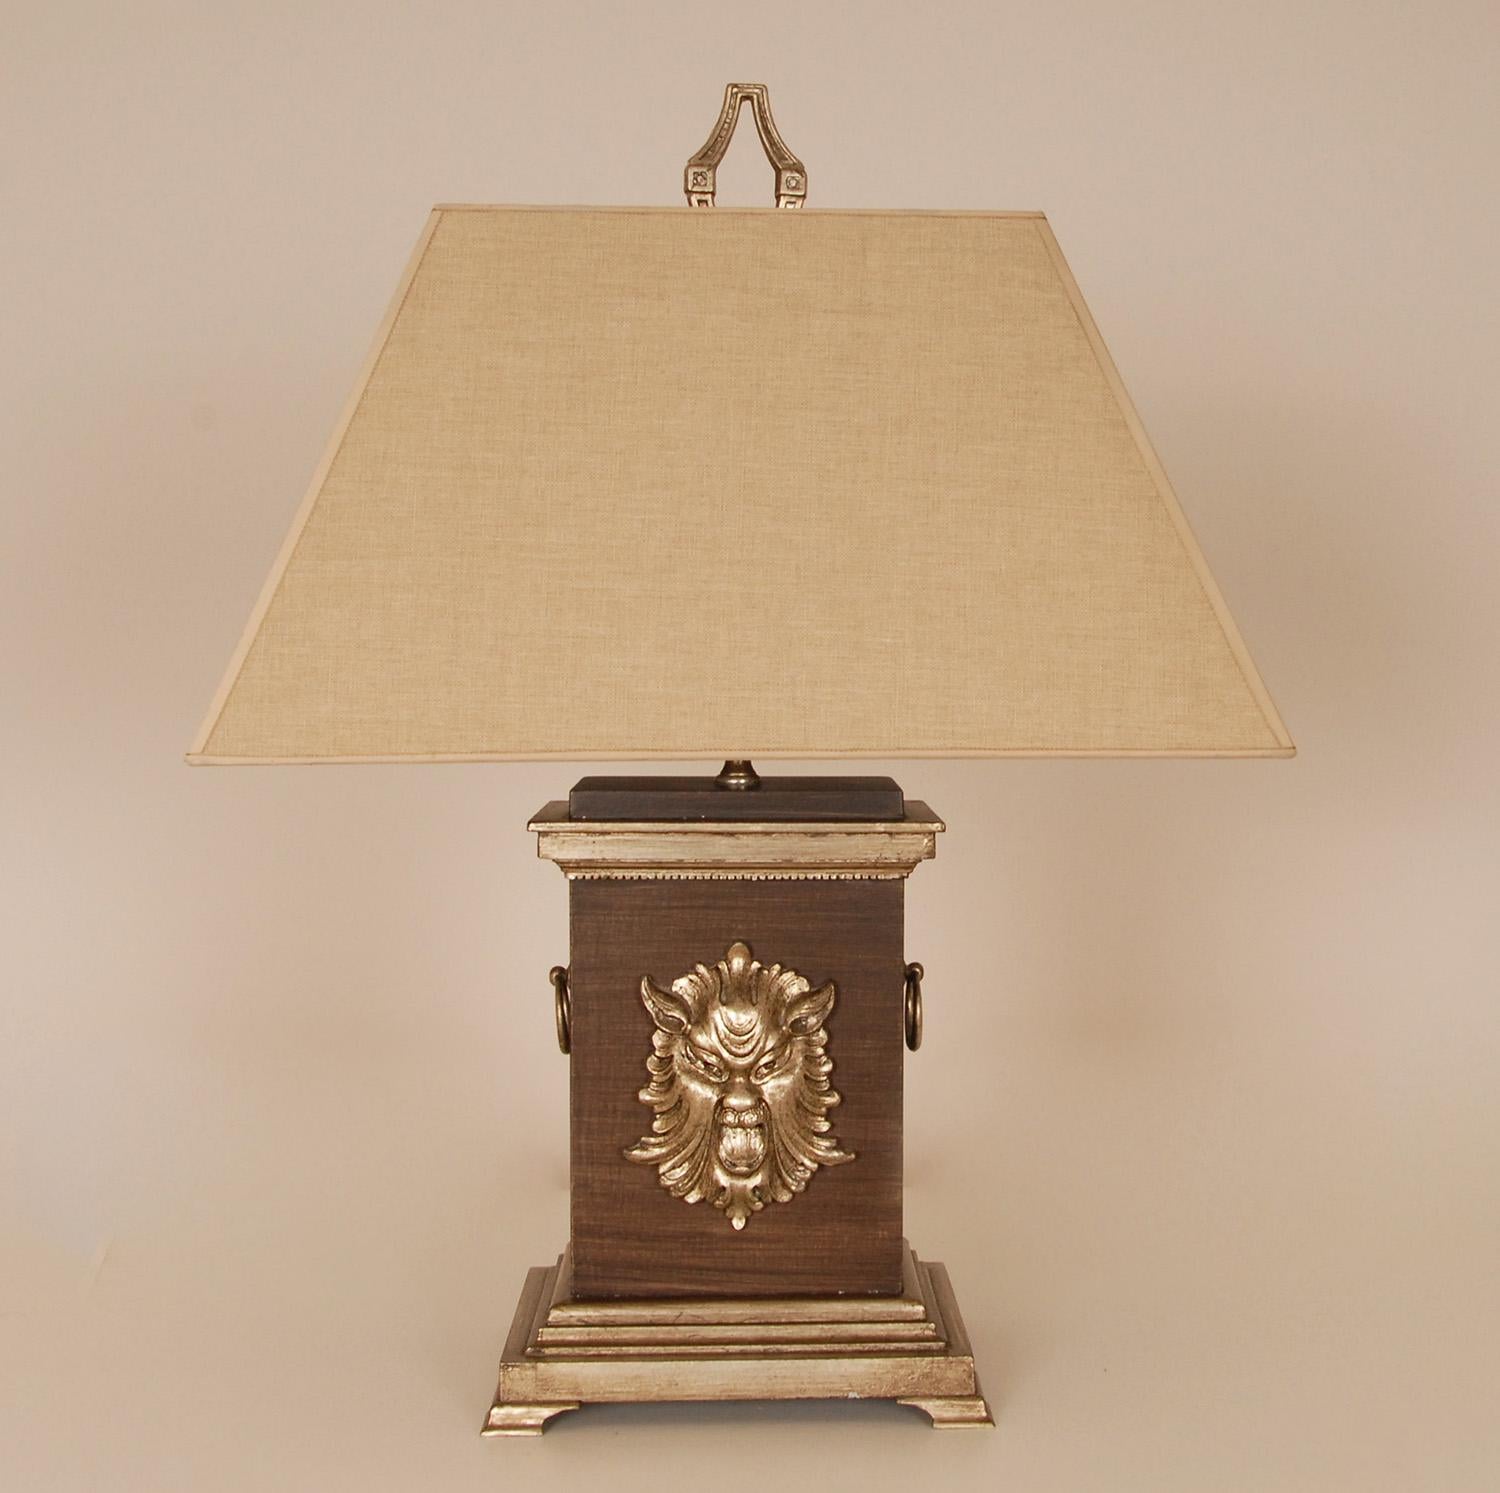 Vintage French table lamps Baroque style Faux rosewood and silver plated wooden bouillotte lamps.
Style: Louis XVI, Empire, Regency, Neoclassical, Antique, Vintage, classic table lamps
Design: In the manner of E.F. Caldwell, Chapman, Maison Charles,